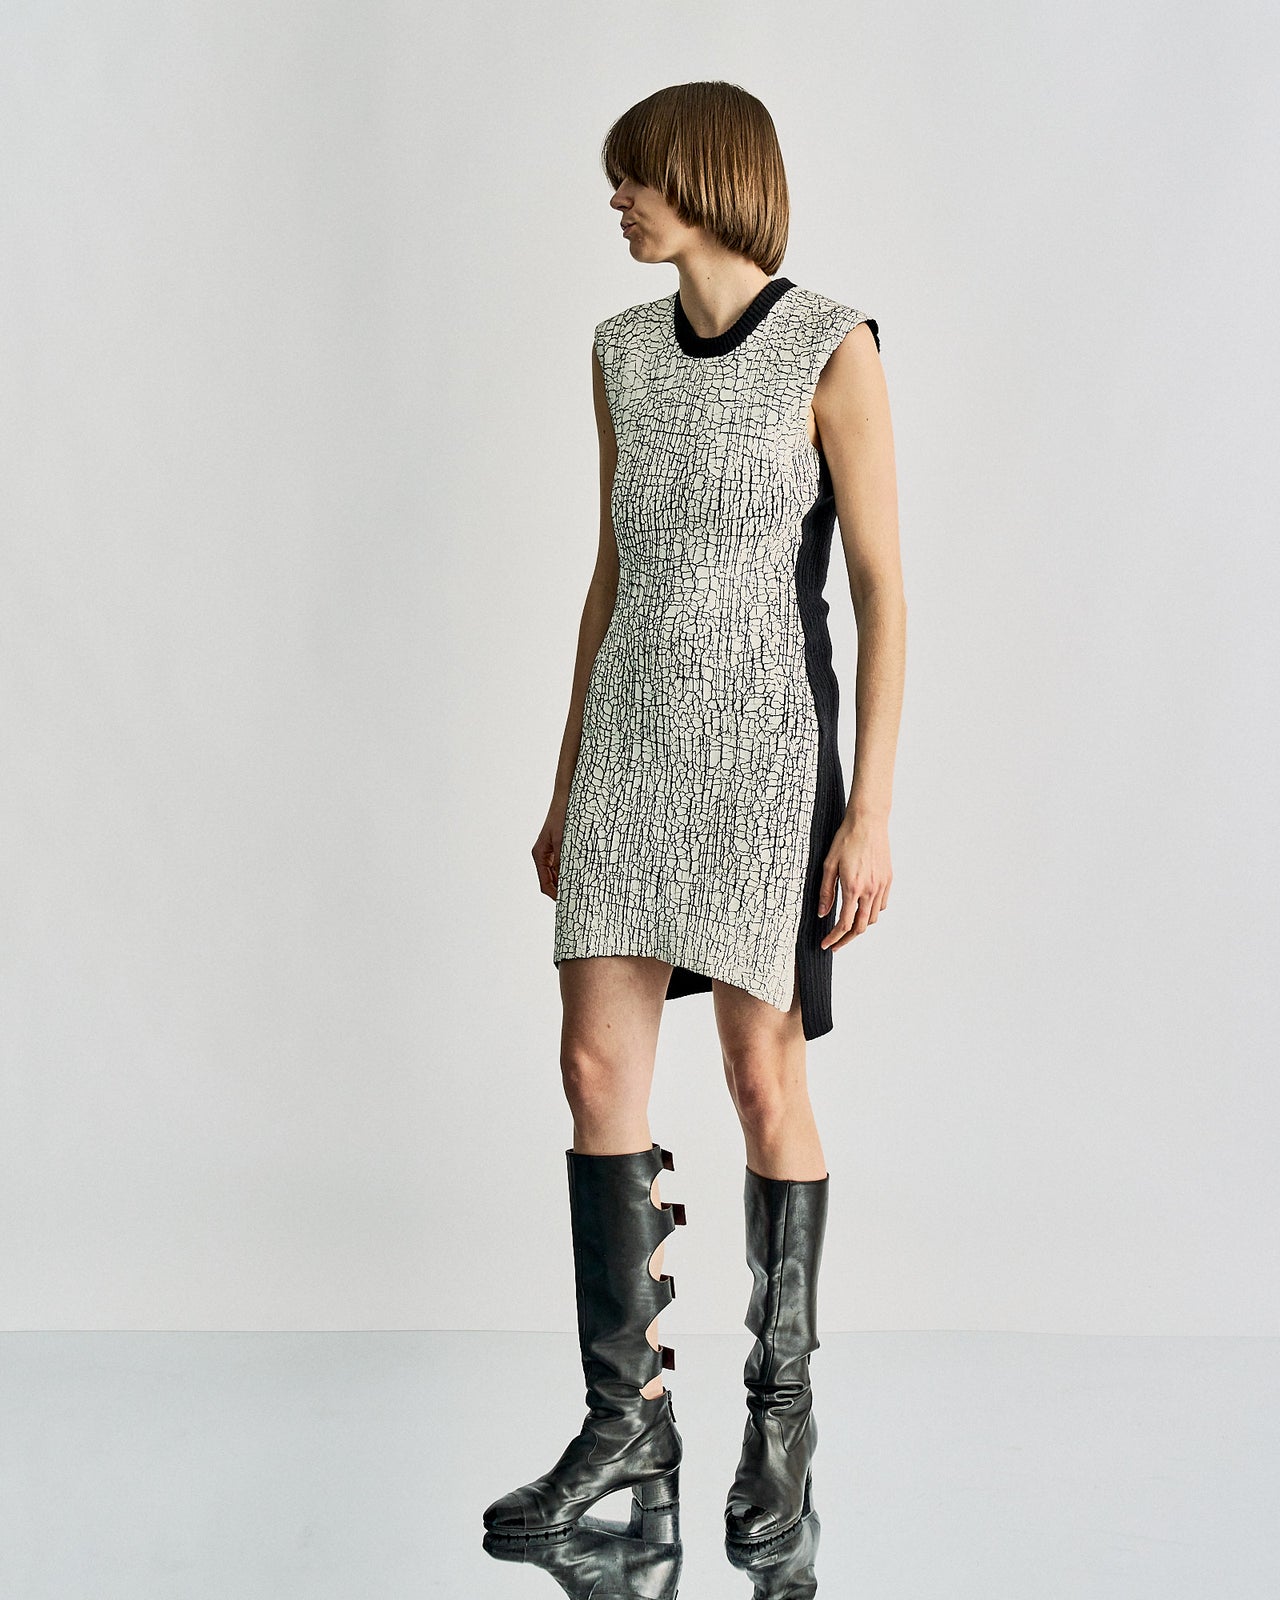 AW 2013 wool cracked dress